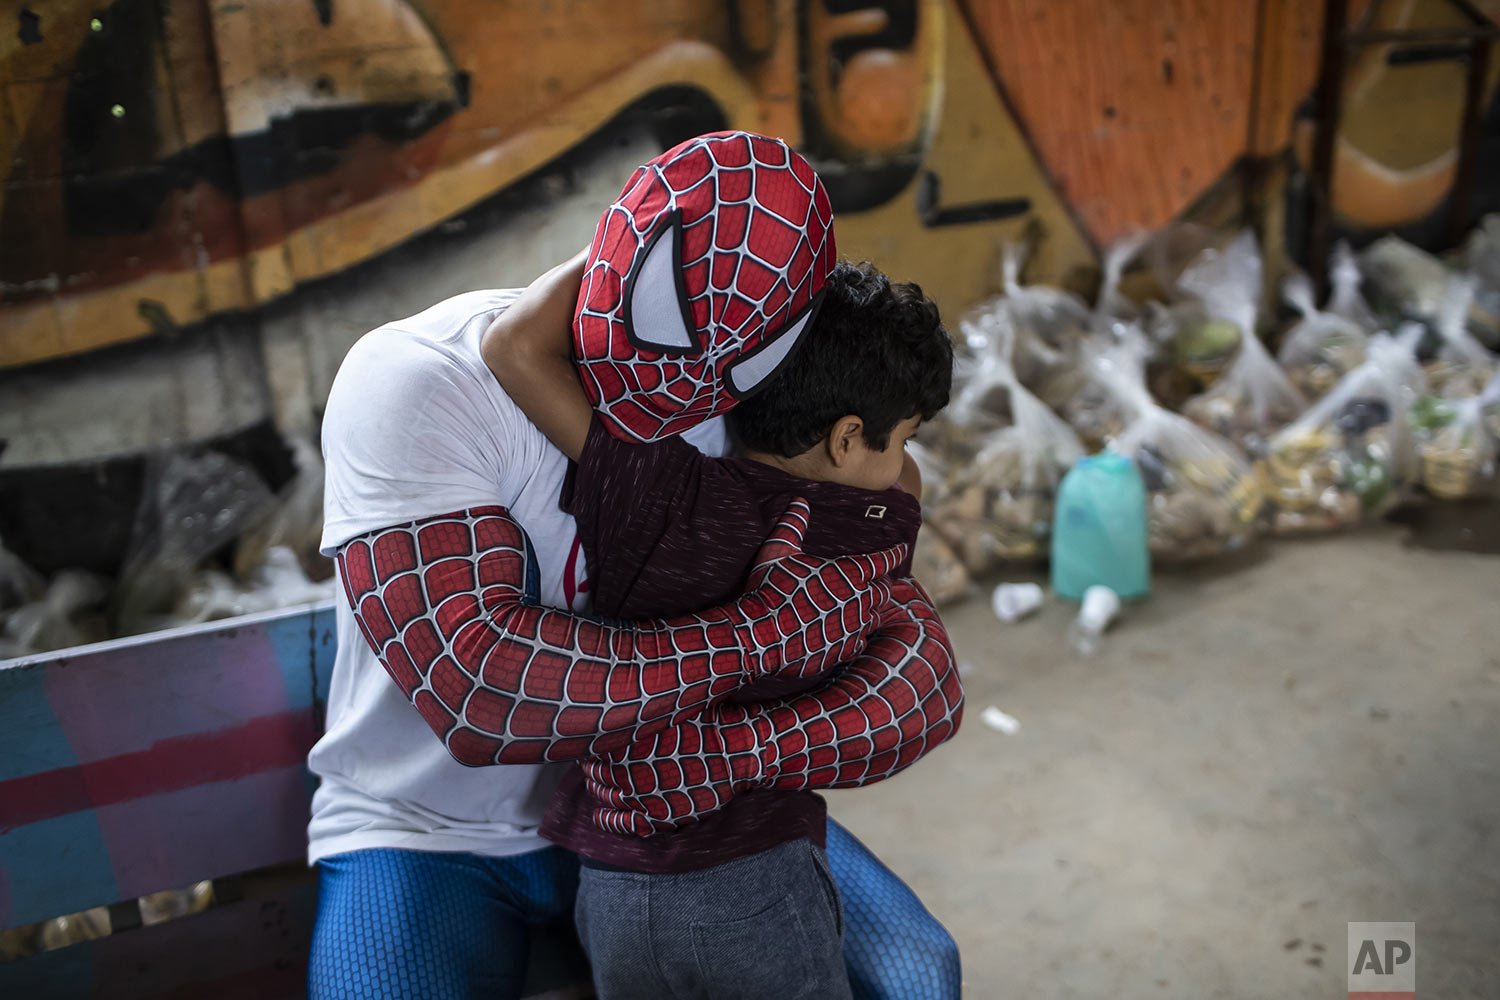  A volunteer dressed as Spiderman embraces a child in the Jardim Gramacho favela of Rio de Janeiro, Brazil, Oct. 30, 2021, during a food kit delivery donated by the non-governmental organization "Covid Sem Fome" that works to fight hunger. (AP Photo/